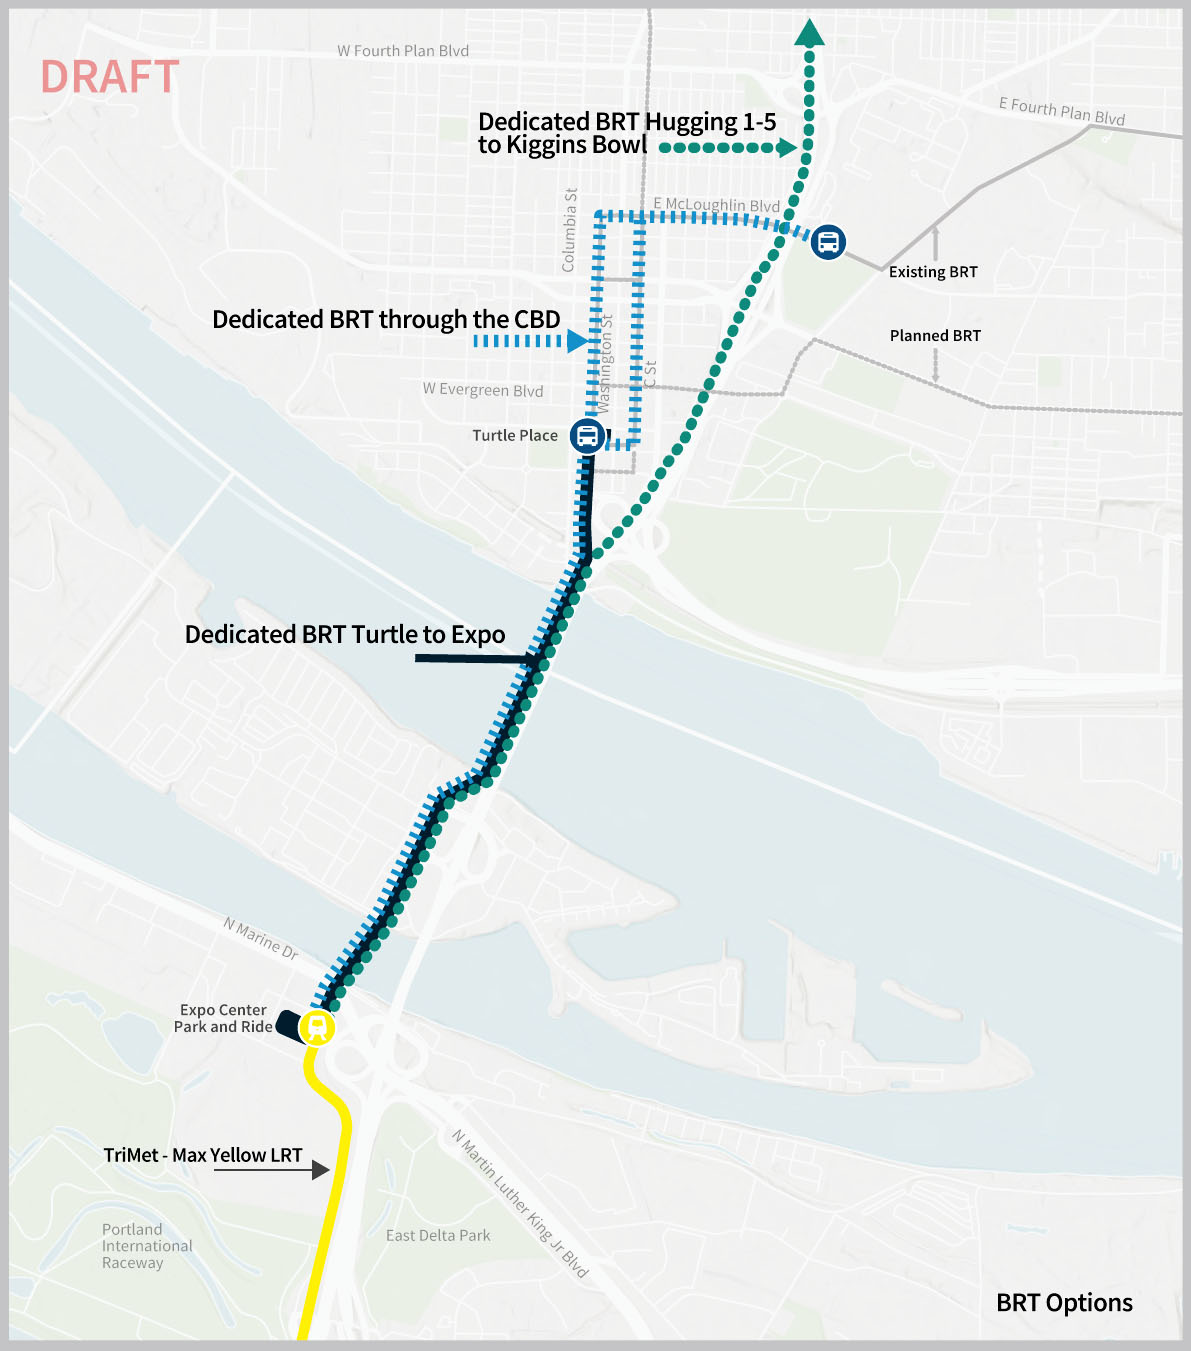 Image is of a map showing sections of North Portland, Marine Drive and Vancouver. In North Portland, The TriMet - Max Yellow Line Light Rail is shown, stopping at the Expo Center Park and Ride.  Map shows all three BRT transit options; Dedicated BRT Turtle to Expo, Dedicated BRT hugging I-5 to Kiggins Bowl, and Dedicated BRT through Vancouver Central Business District.  The dedicated BRT Turtle to Expo line is shown on map extending via a dedicated bus lane from Turtle place Transit Station in downtown Vancouver south to a terminus near the Expo Center in Portland.  The Dedicated BRT Hugging I-5 option is shown on map extending from Kiggins Bowl south to the Max Expo Center station on a dedicated bus lane adjacent to Interstate 5. The dedicated BRT through the Central Business district is shown on map extending via a dedicated bus lane from McLoughlin Boulevard through Vancouver's Central Business District before crossing the river south to Hayden Island with a terminus near the Expo Center.